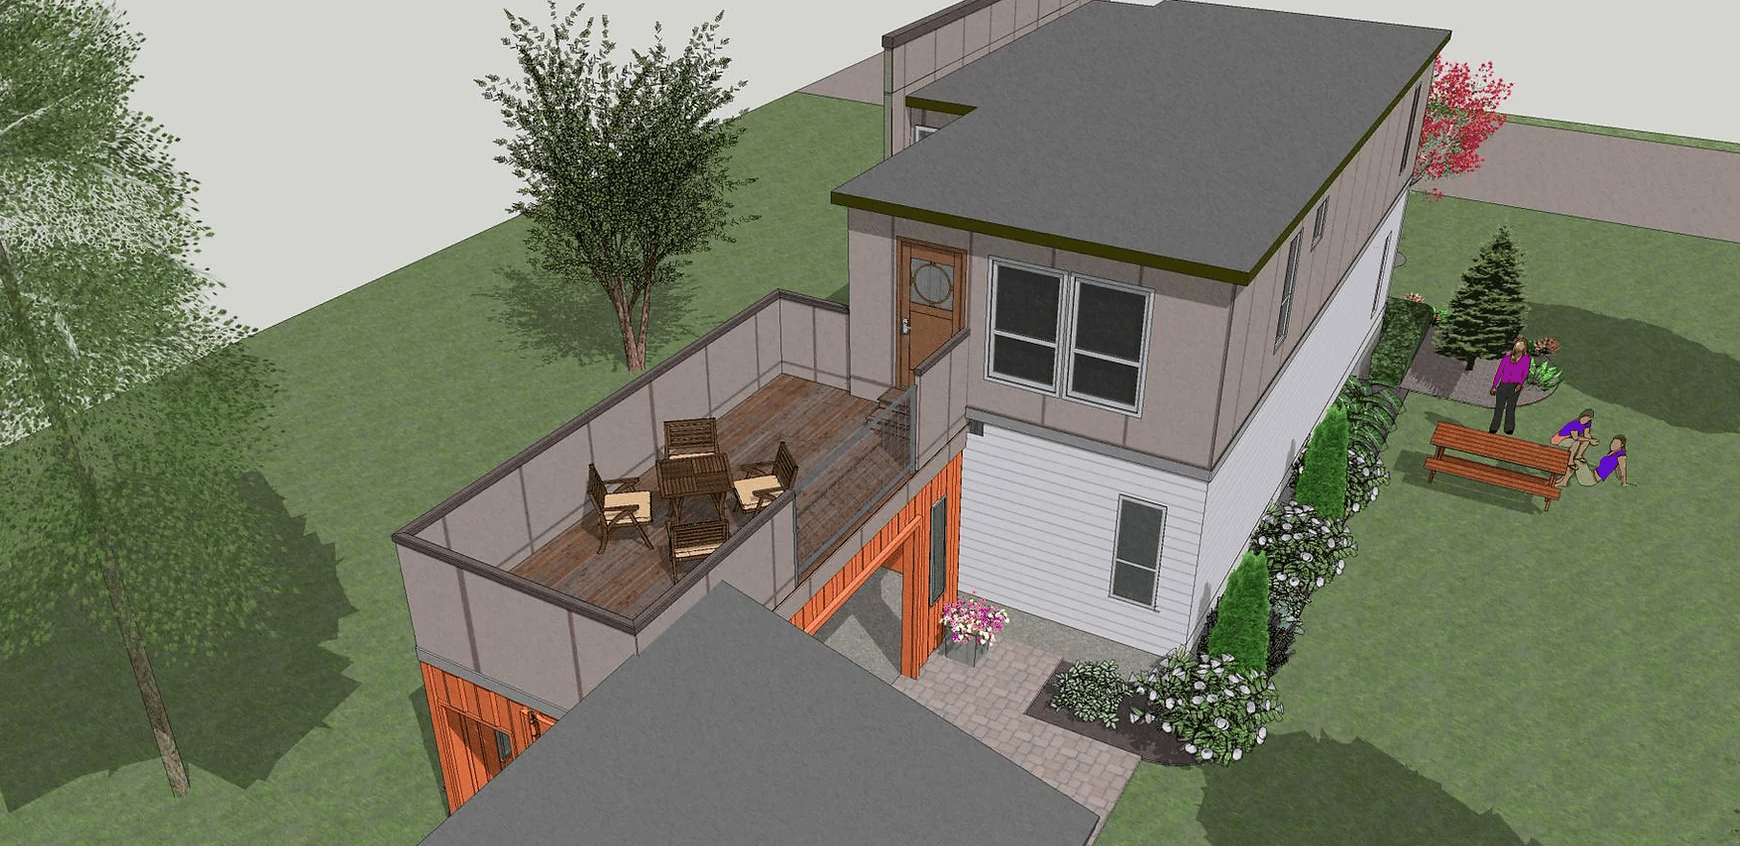 Rendering of a container home